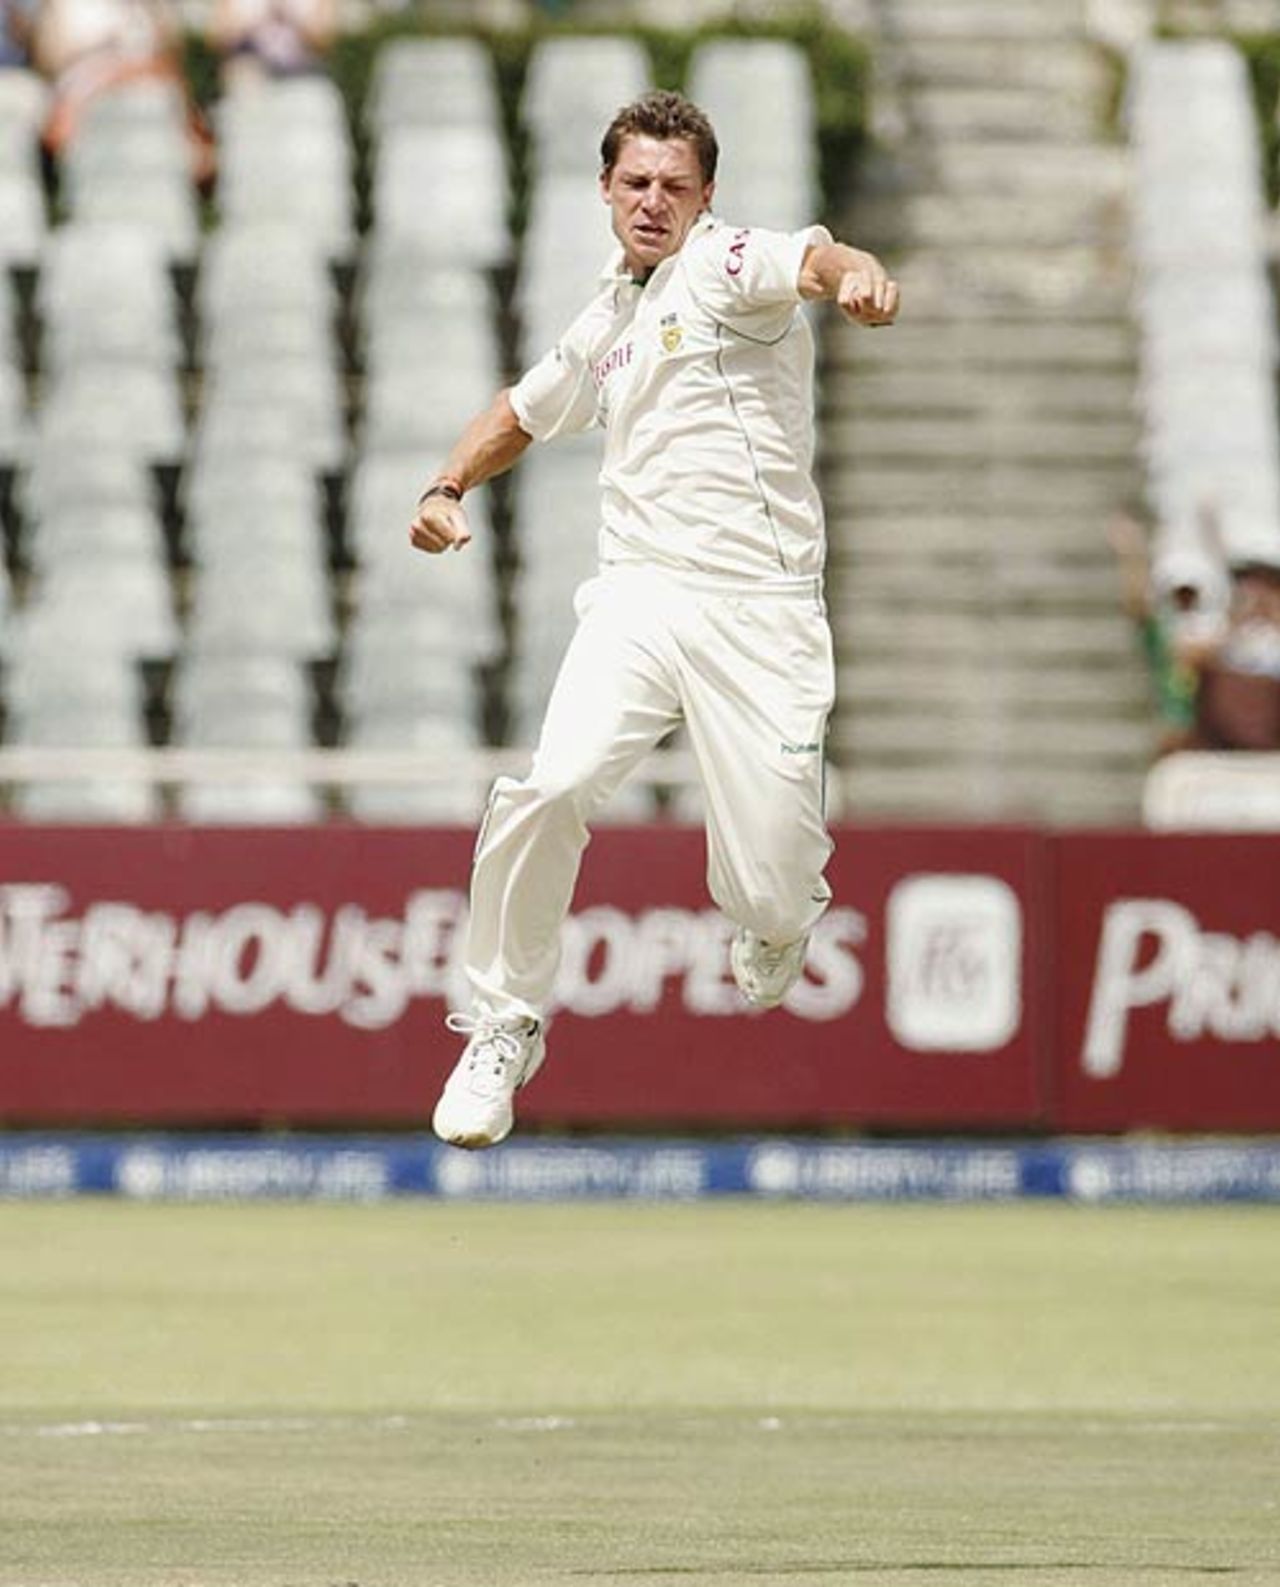 Dale Steyn celebrates Virender Sehwag's wicket, South Africa v India, 3rd Test, Cape Town, 4th day, January 5, 2007